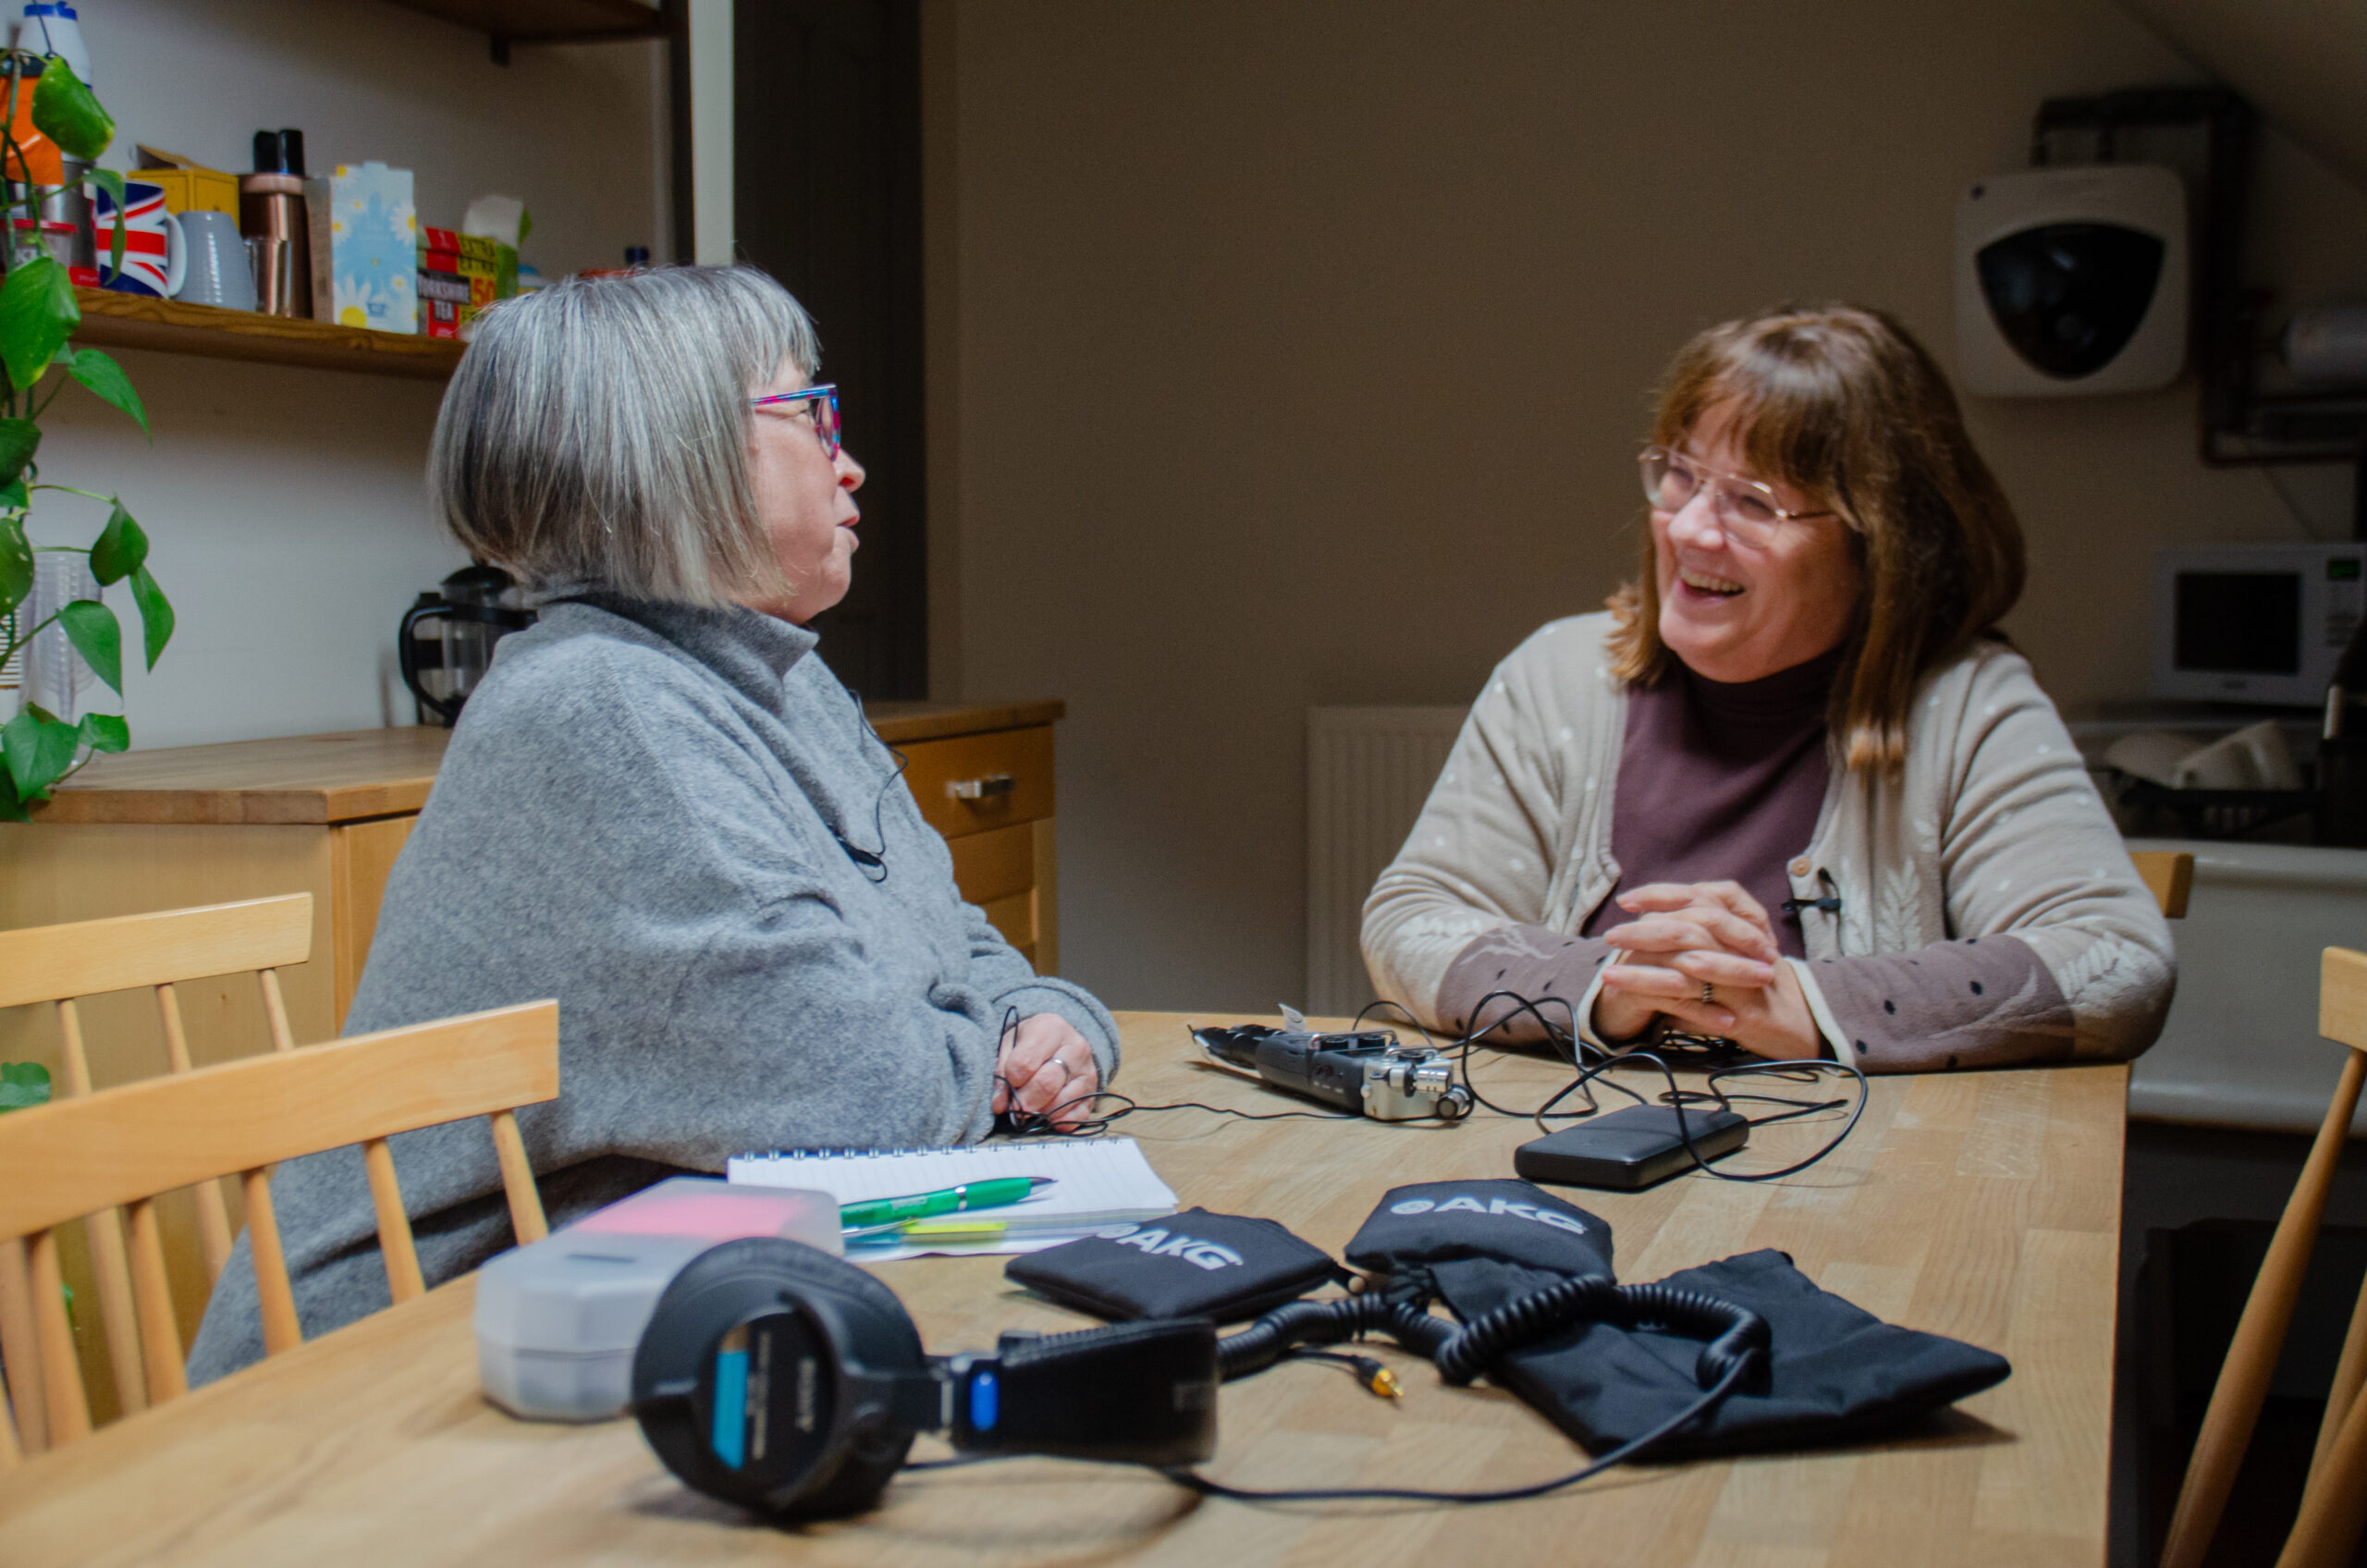 Two older women sat at a table, with sound recording equipment